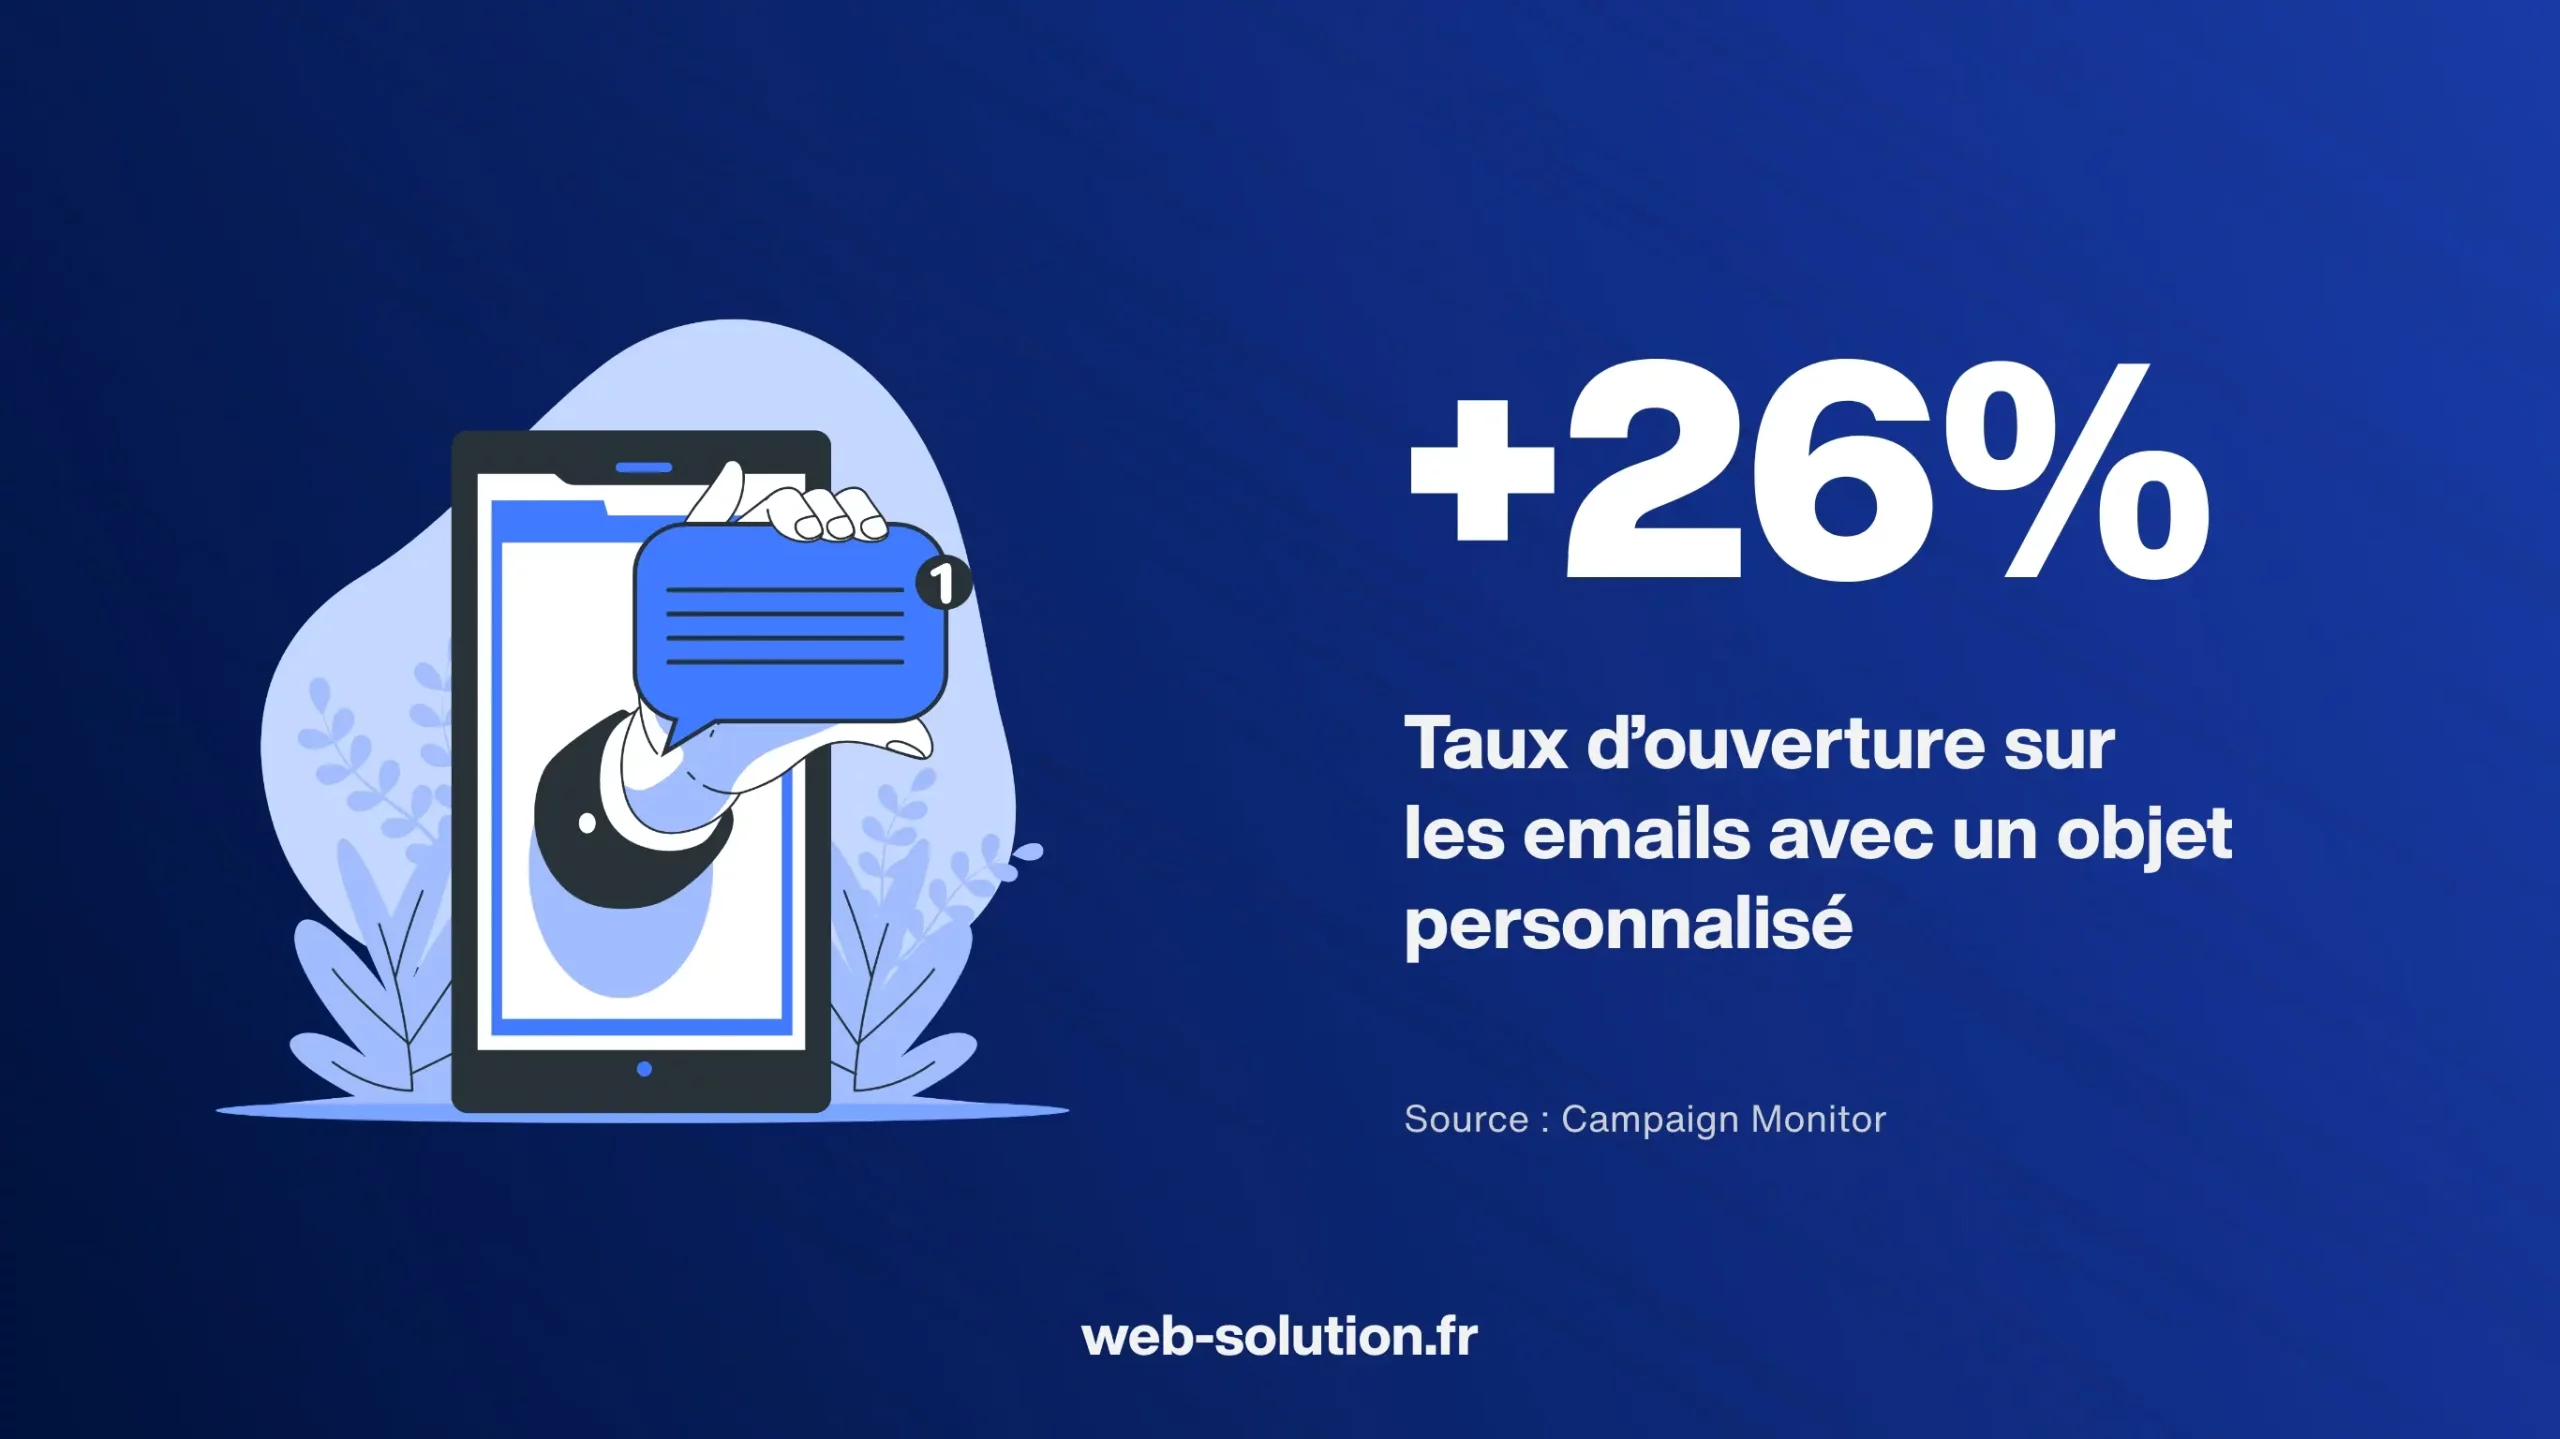 Statistiques email marketing Taux d’ouverture emails personnalisés